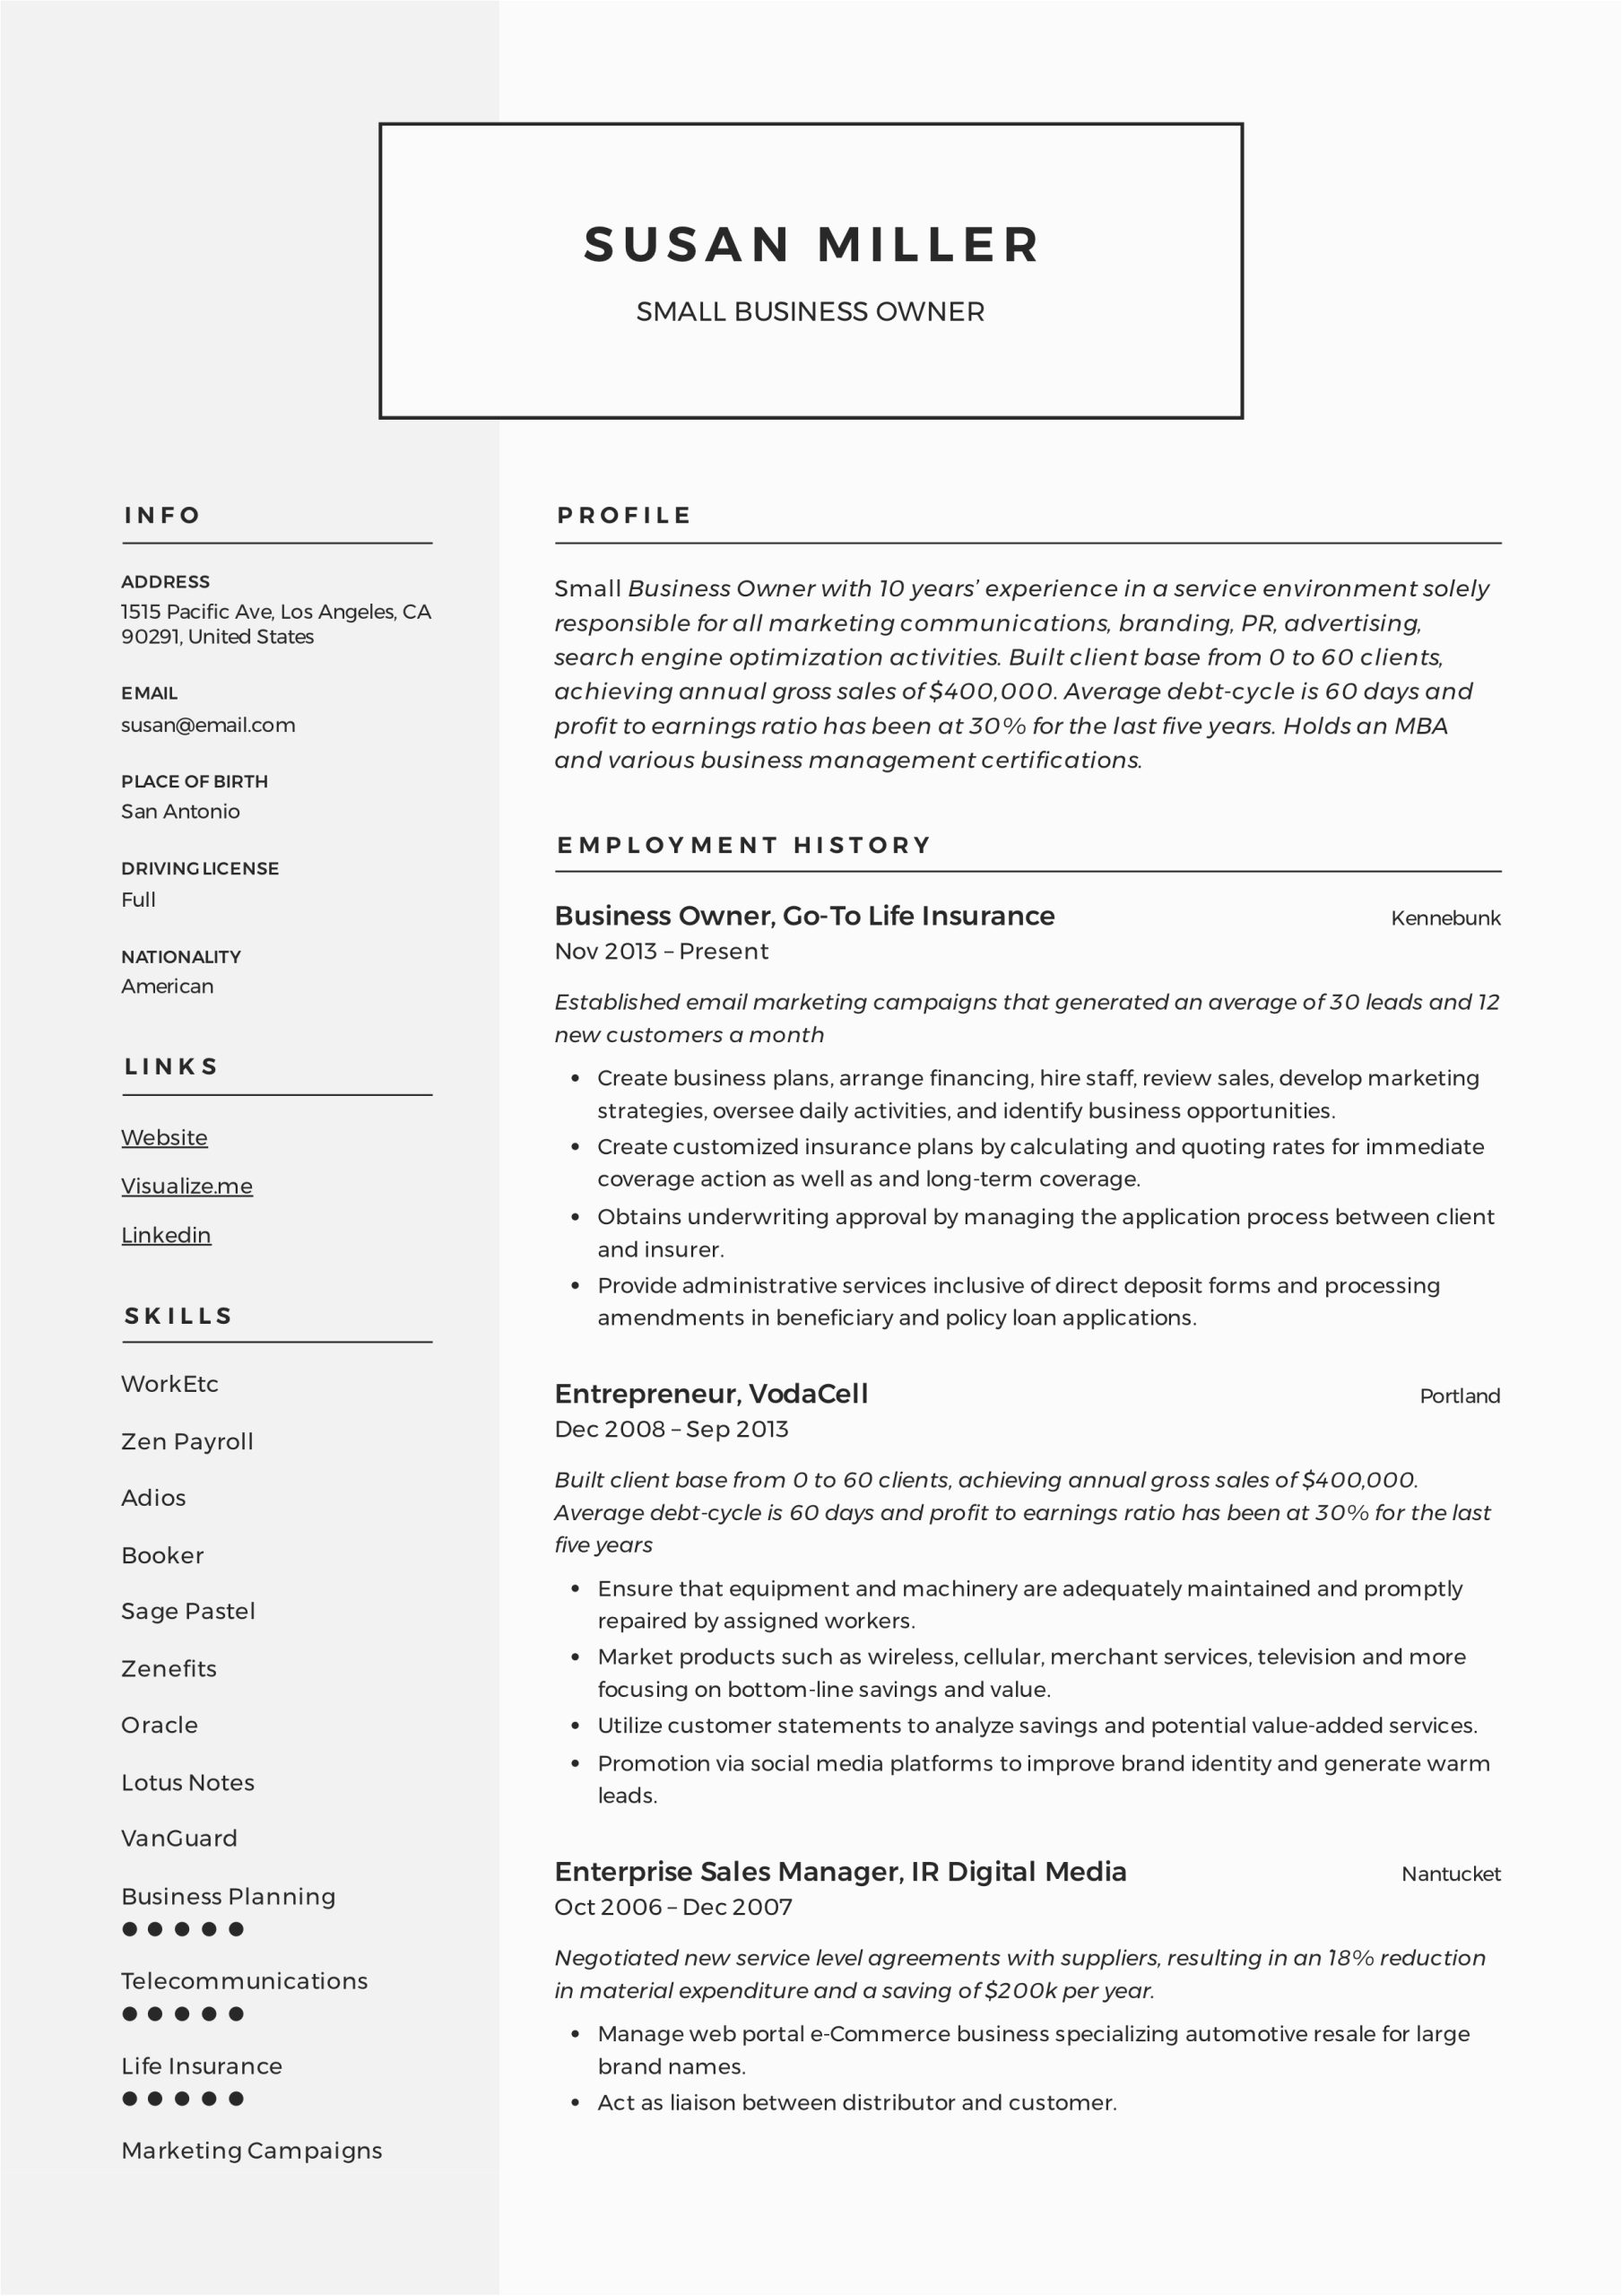 Sample Of Company Resume with Work Experience Small Business Owner Resume Guide 12 Examples Pdf